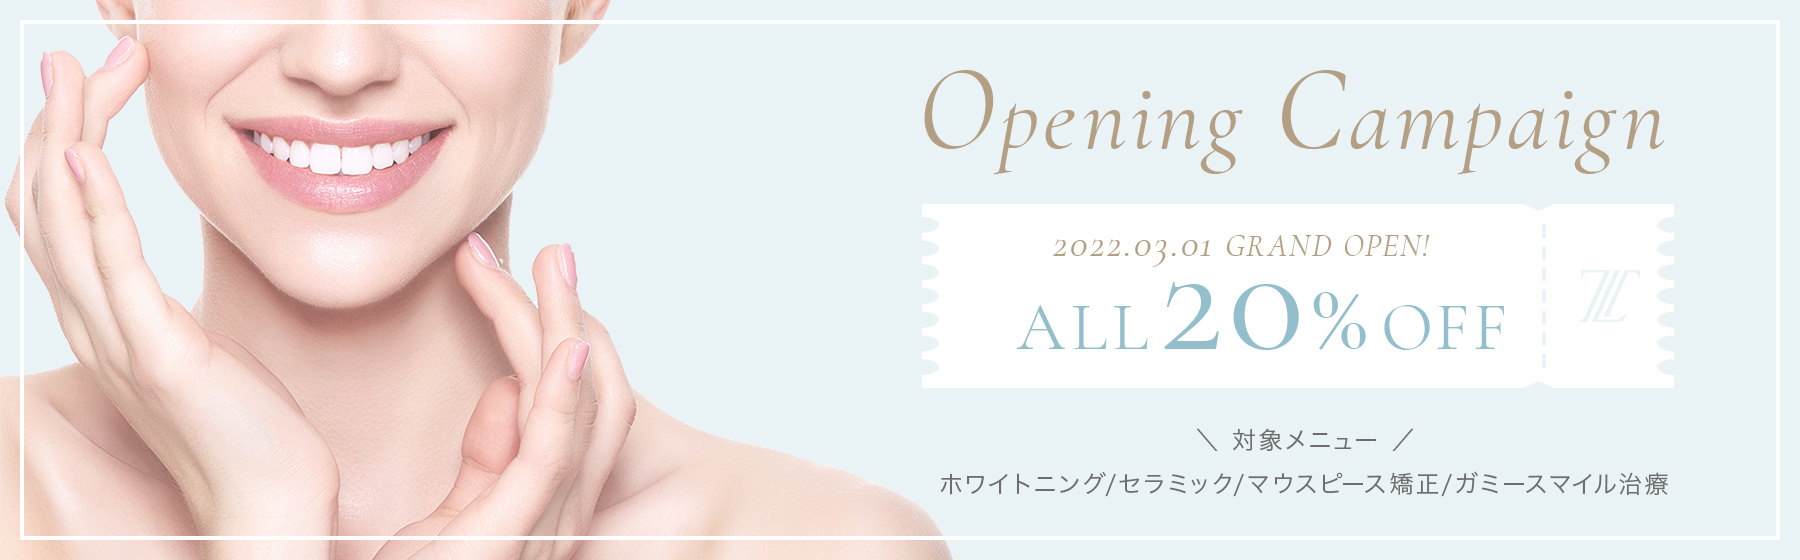 Opening Campaign 全てのメニューを特別価格で受診いただけます！ 2022.03.01 GRAND OPEN! ALL20%OFF